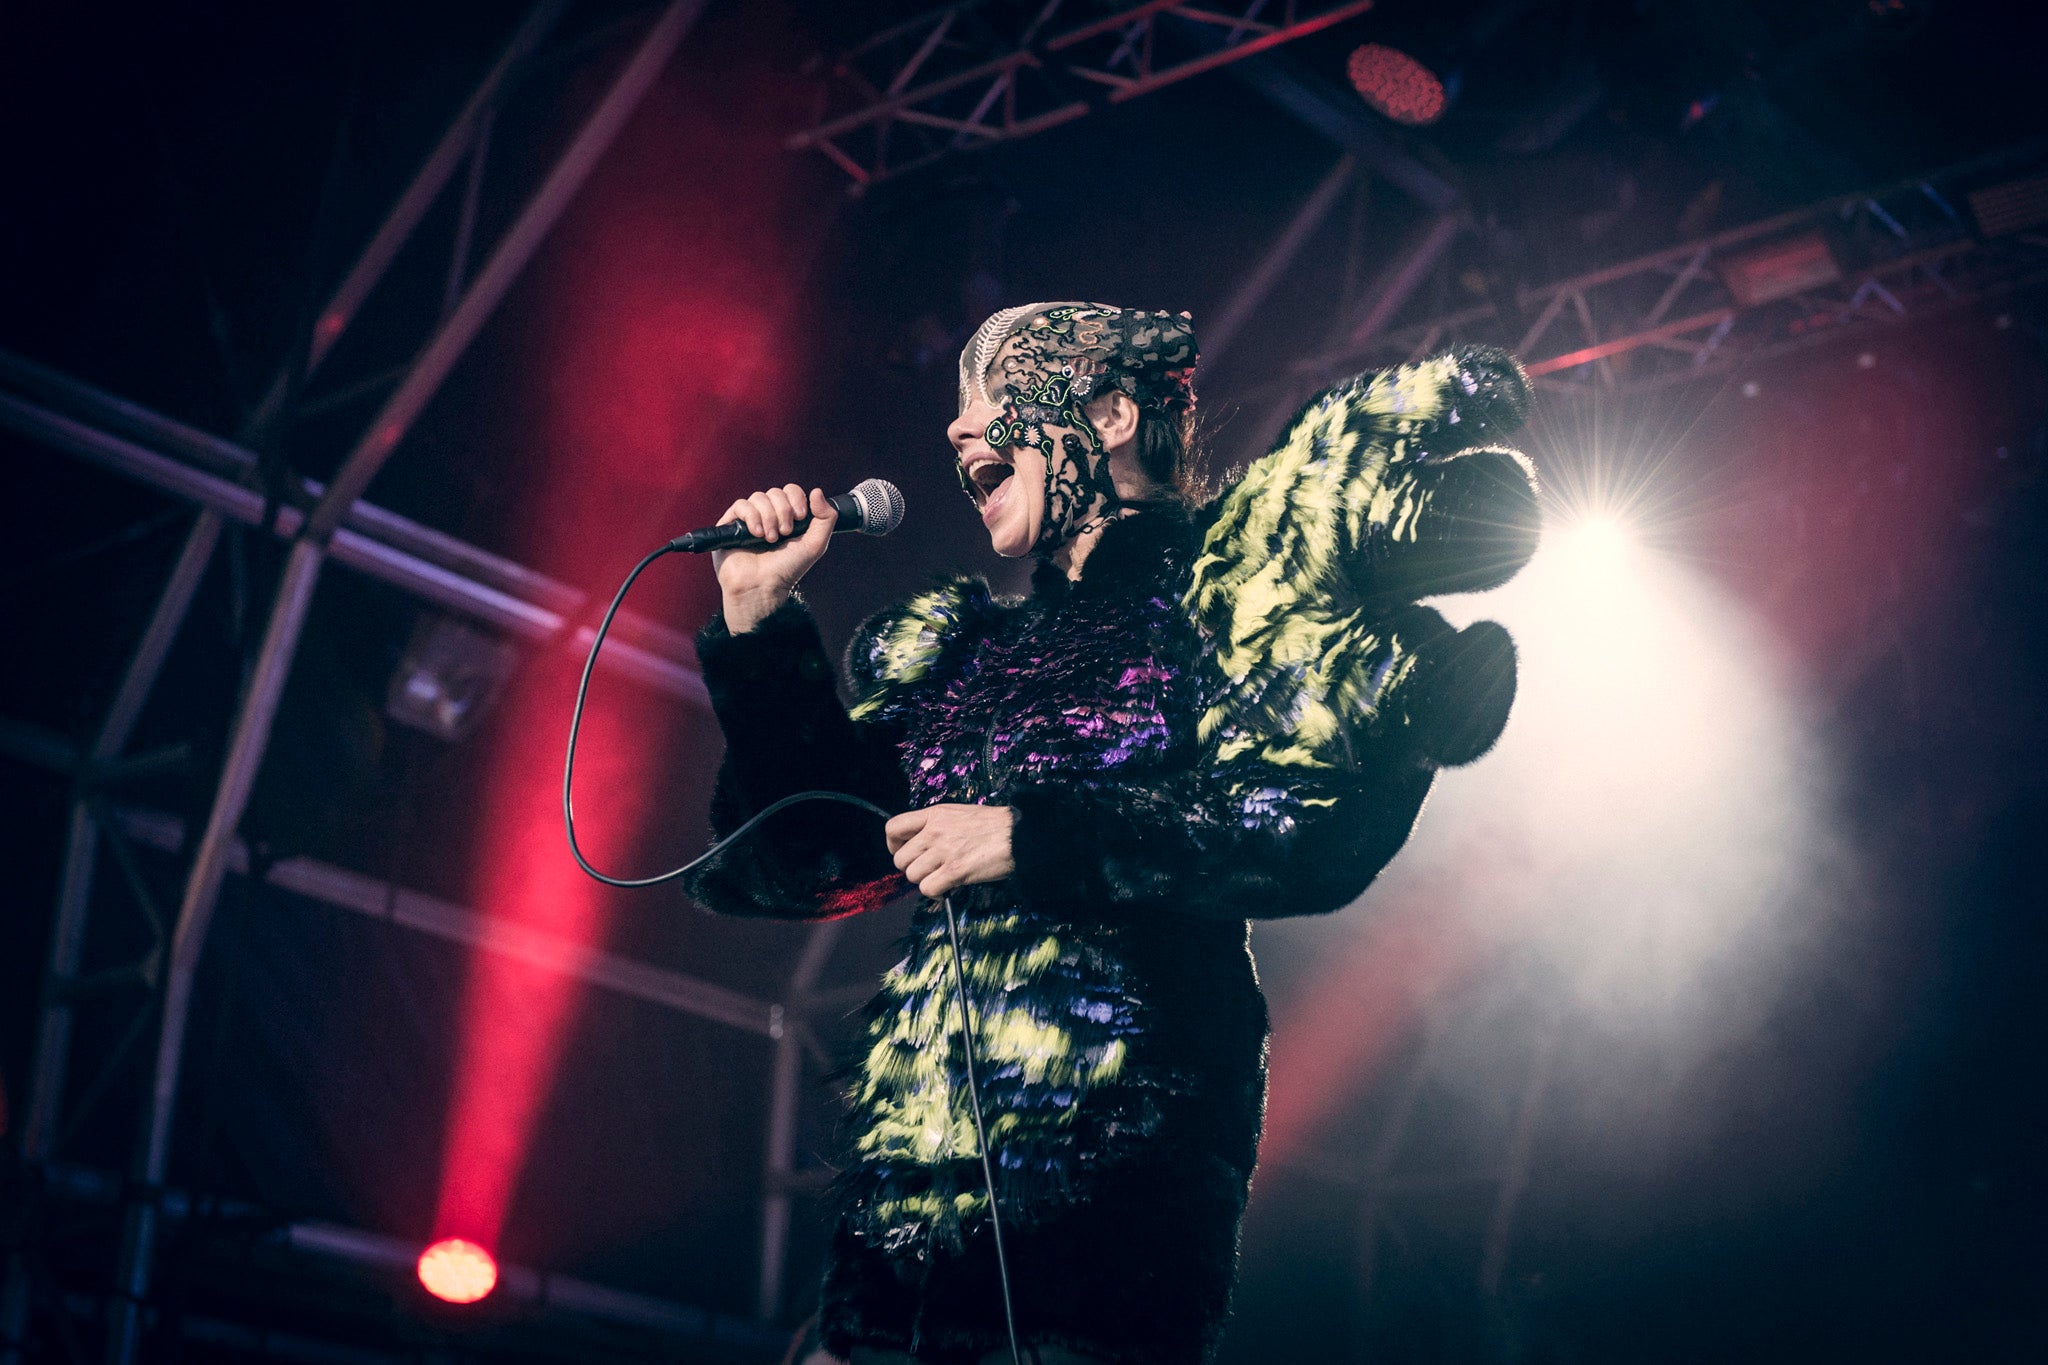 Bjork live at MIF (Manchester International Festival) in Manchester, 5 July 2015